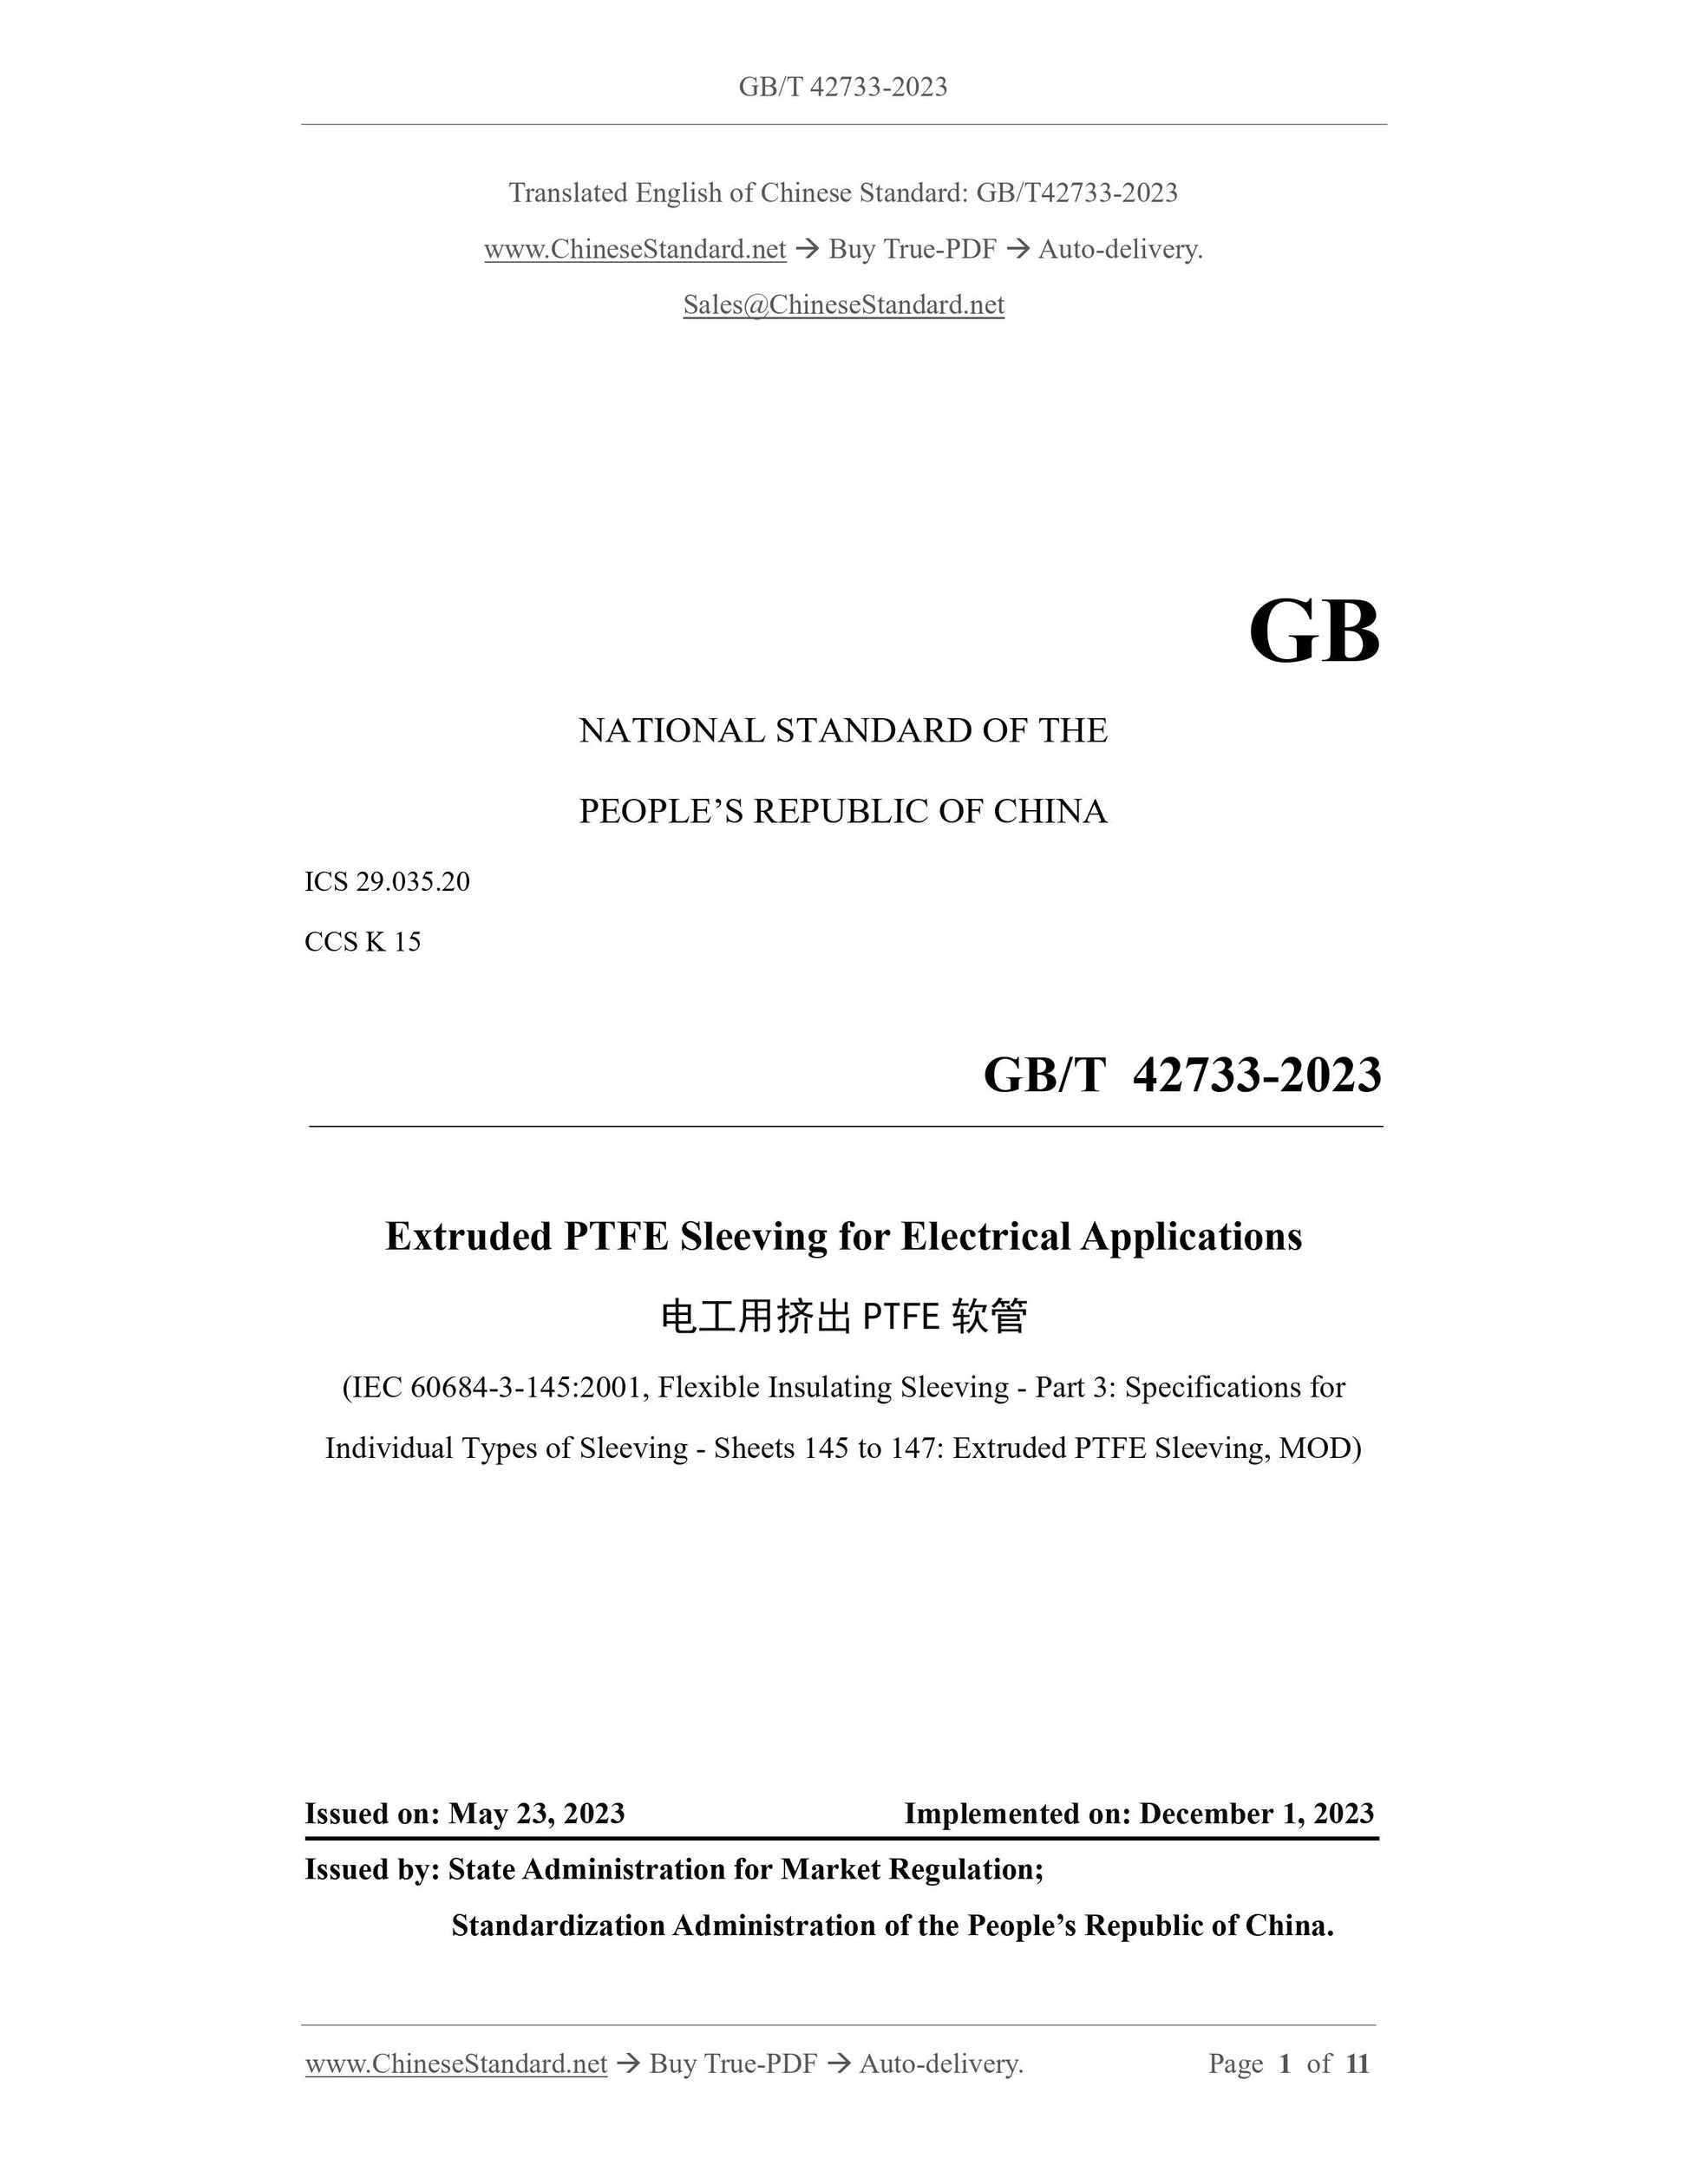 GB/T 42733-2023 Page 1